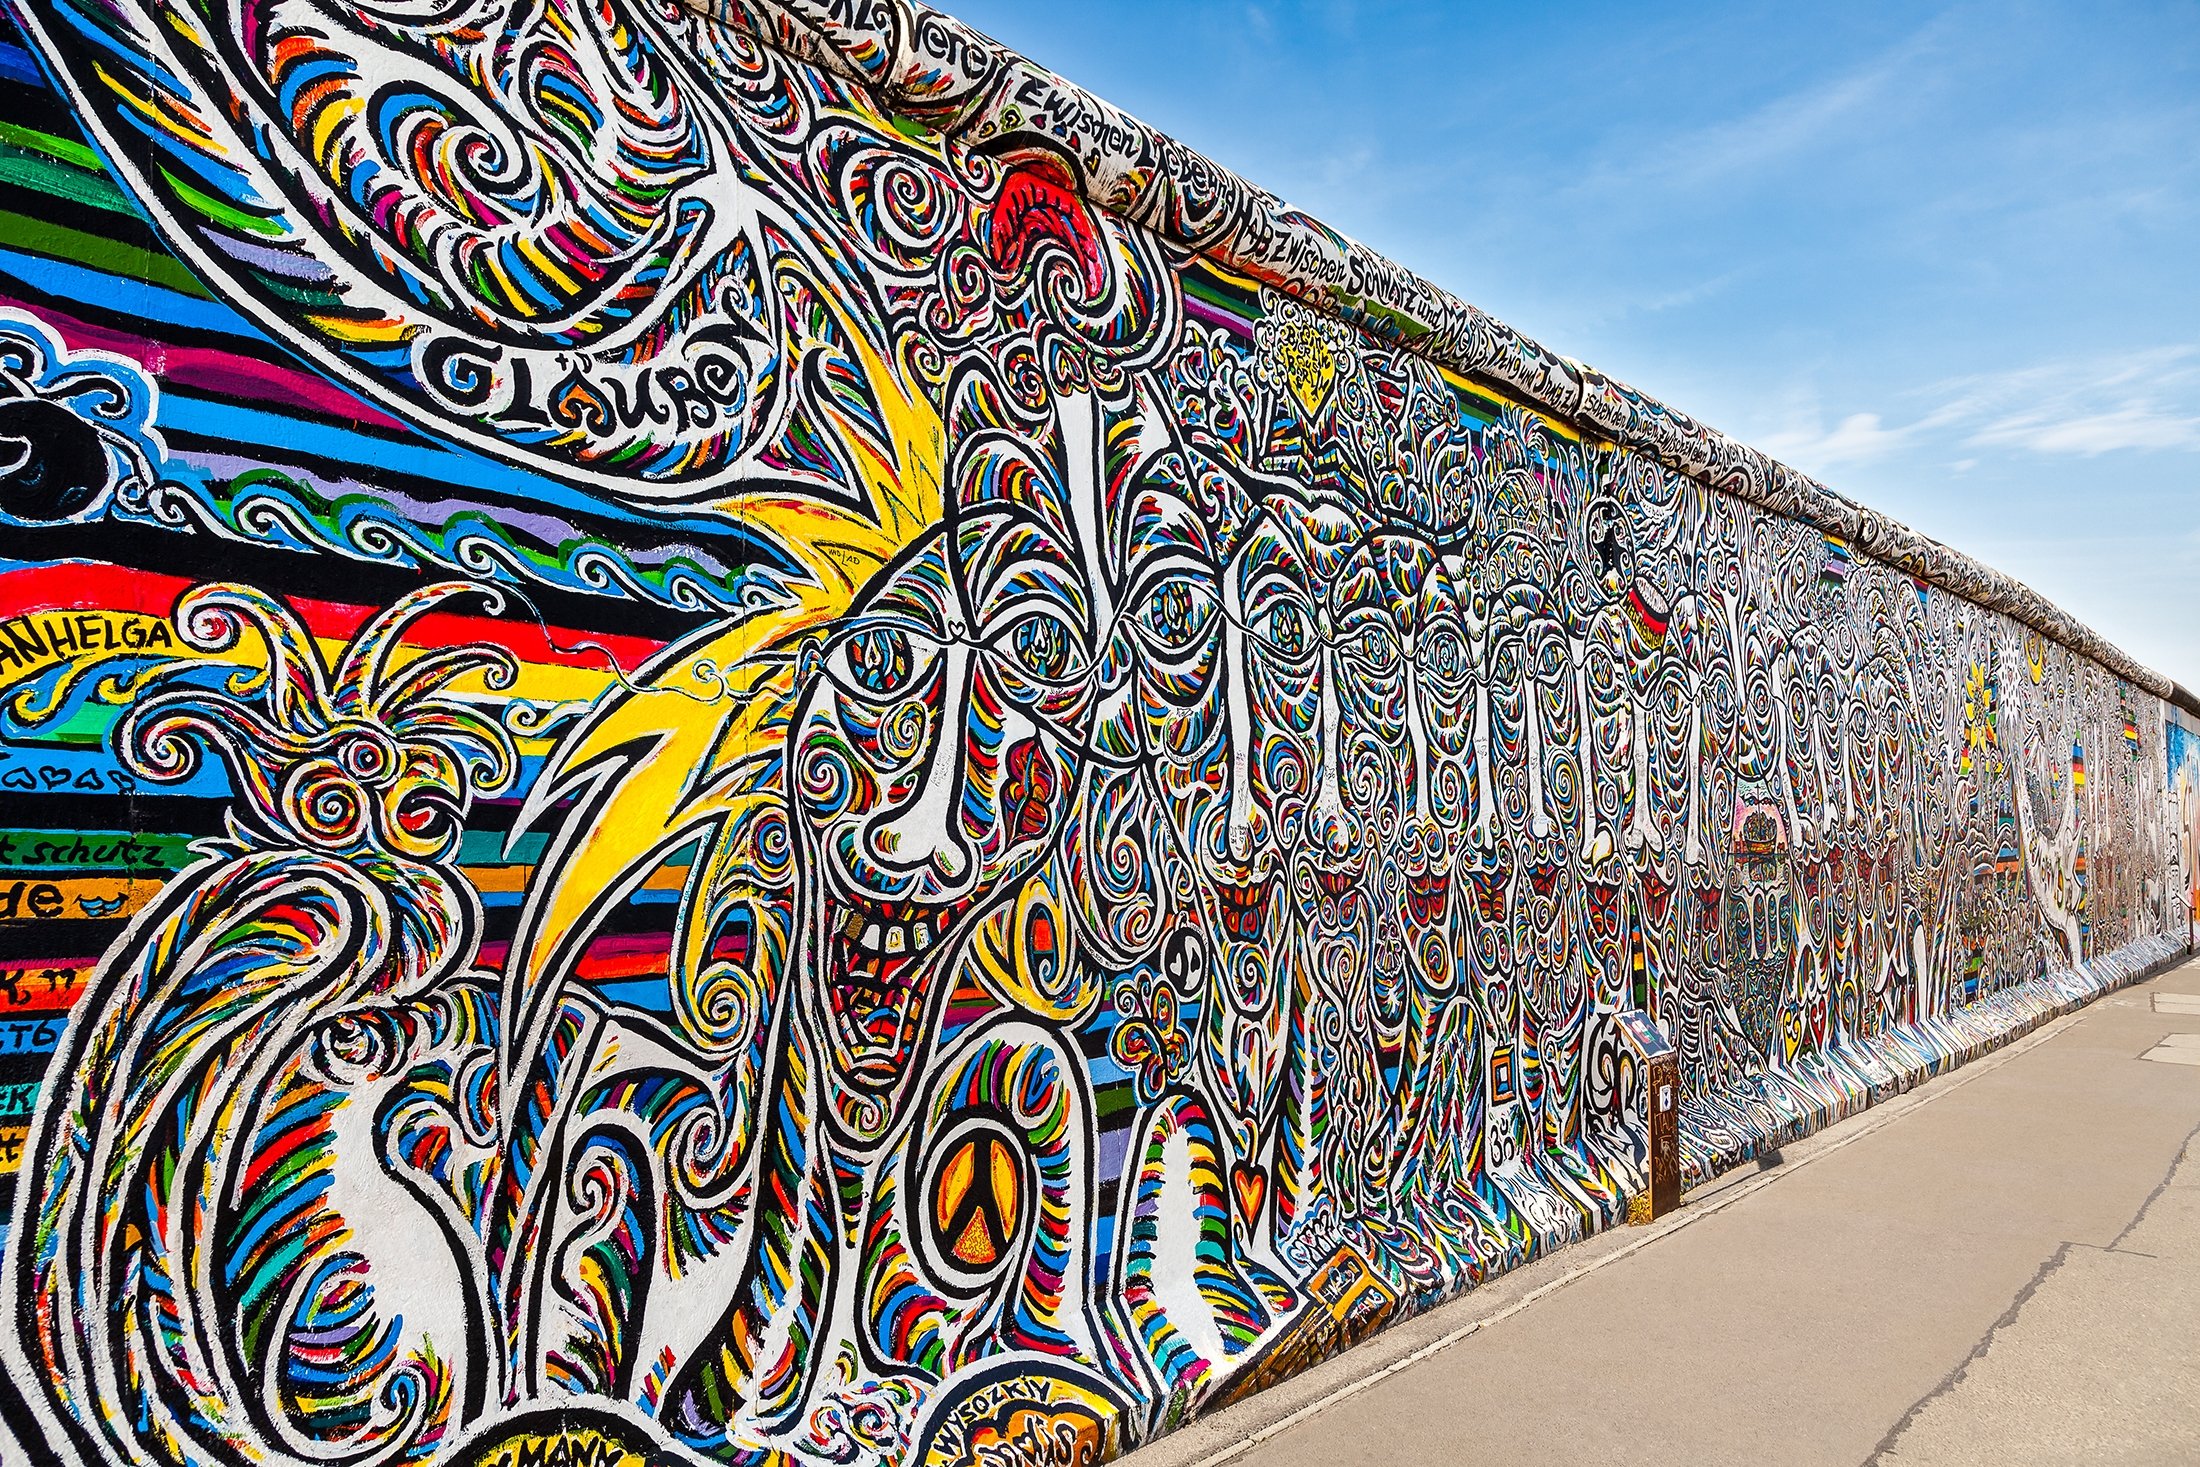 Graffiti can be seen on a part of the original Berlin Wall at East Side Gallery in Berlin, Germany, Sept. 15, 2014. (Shutterstock Photo)